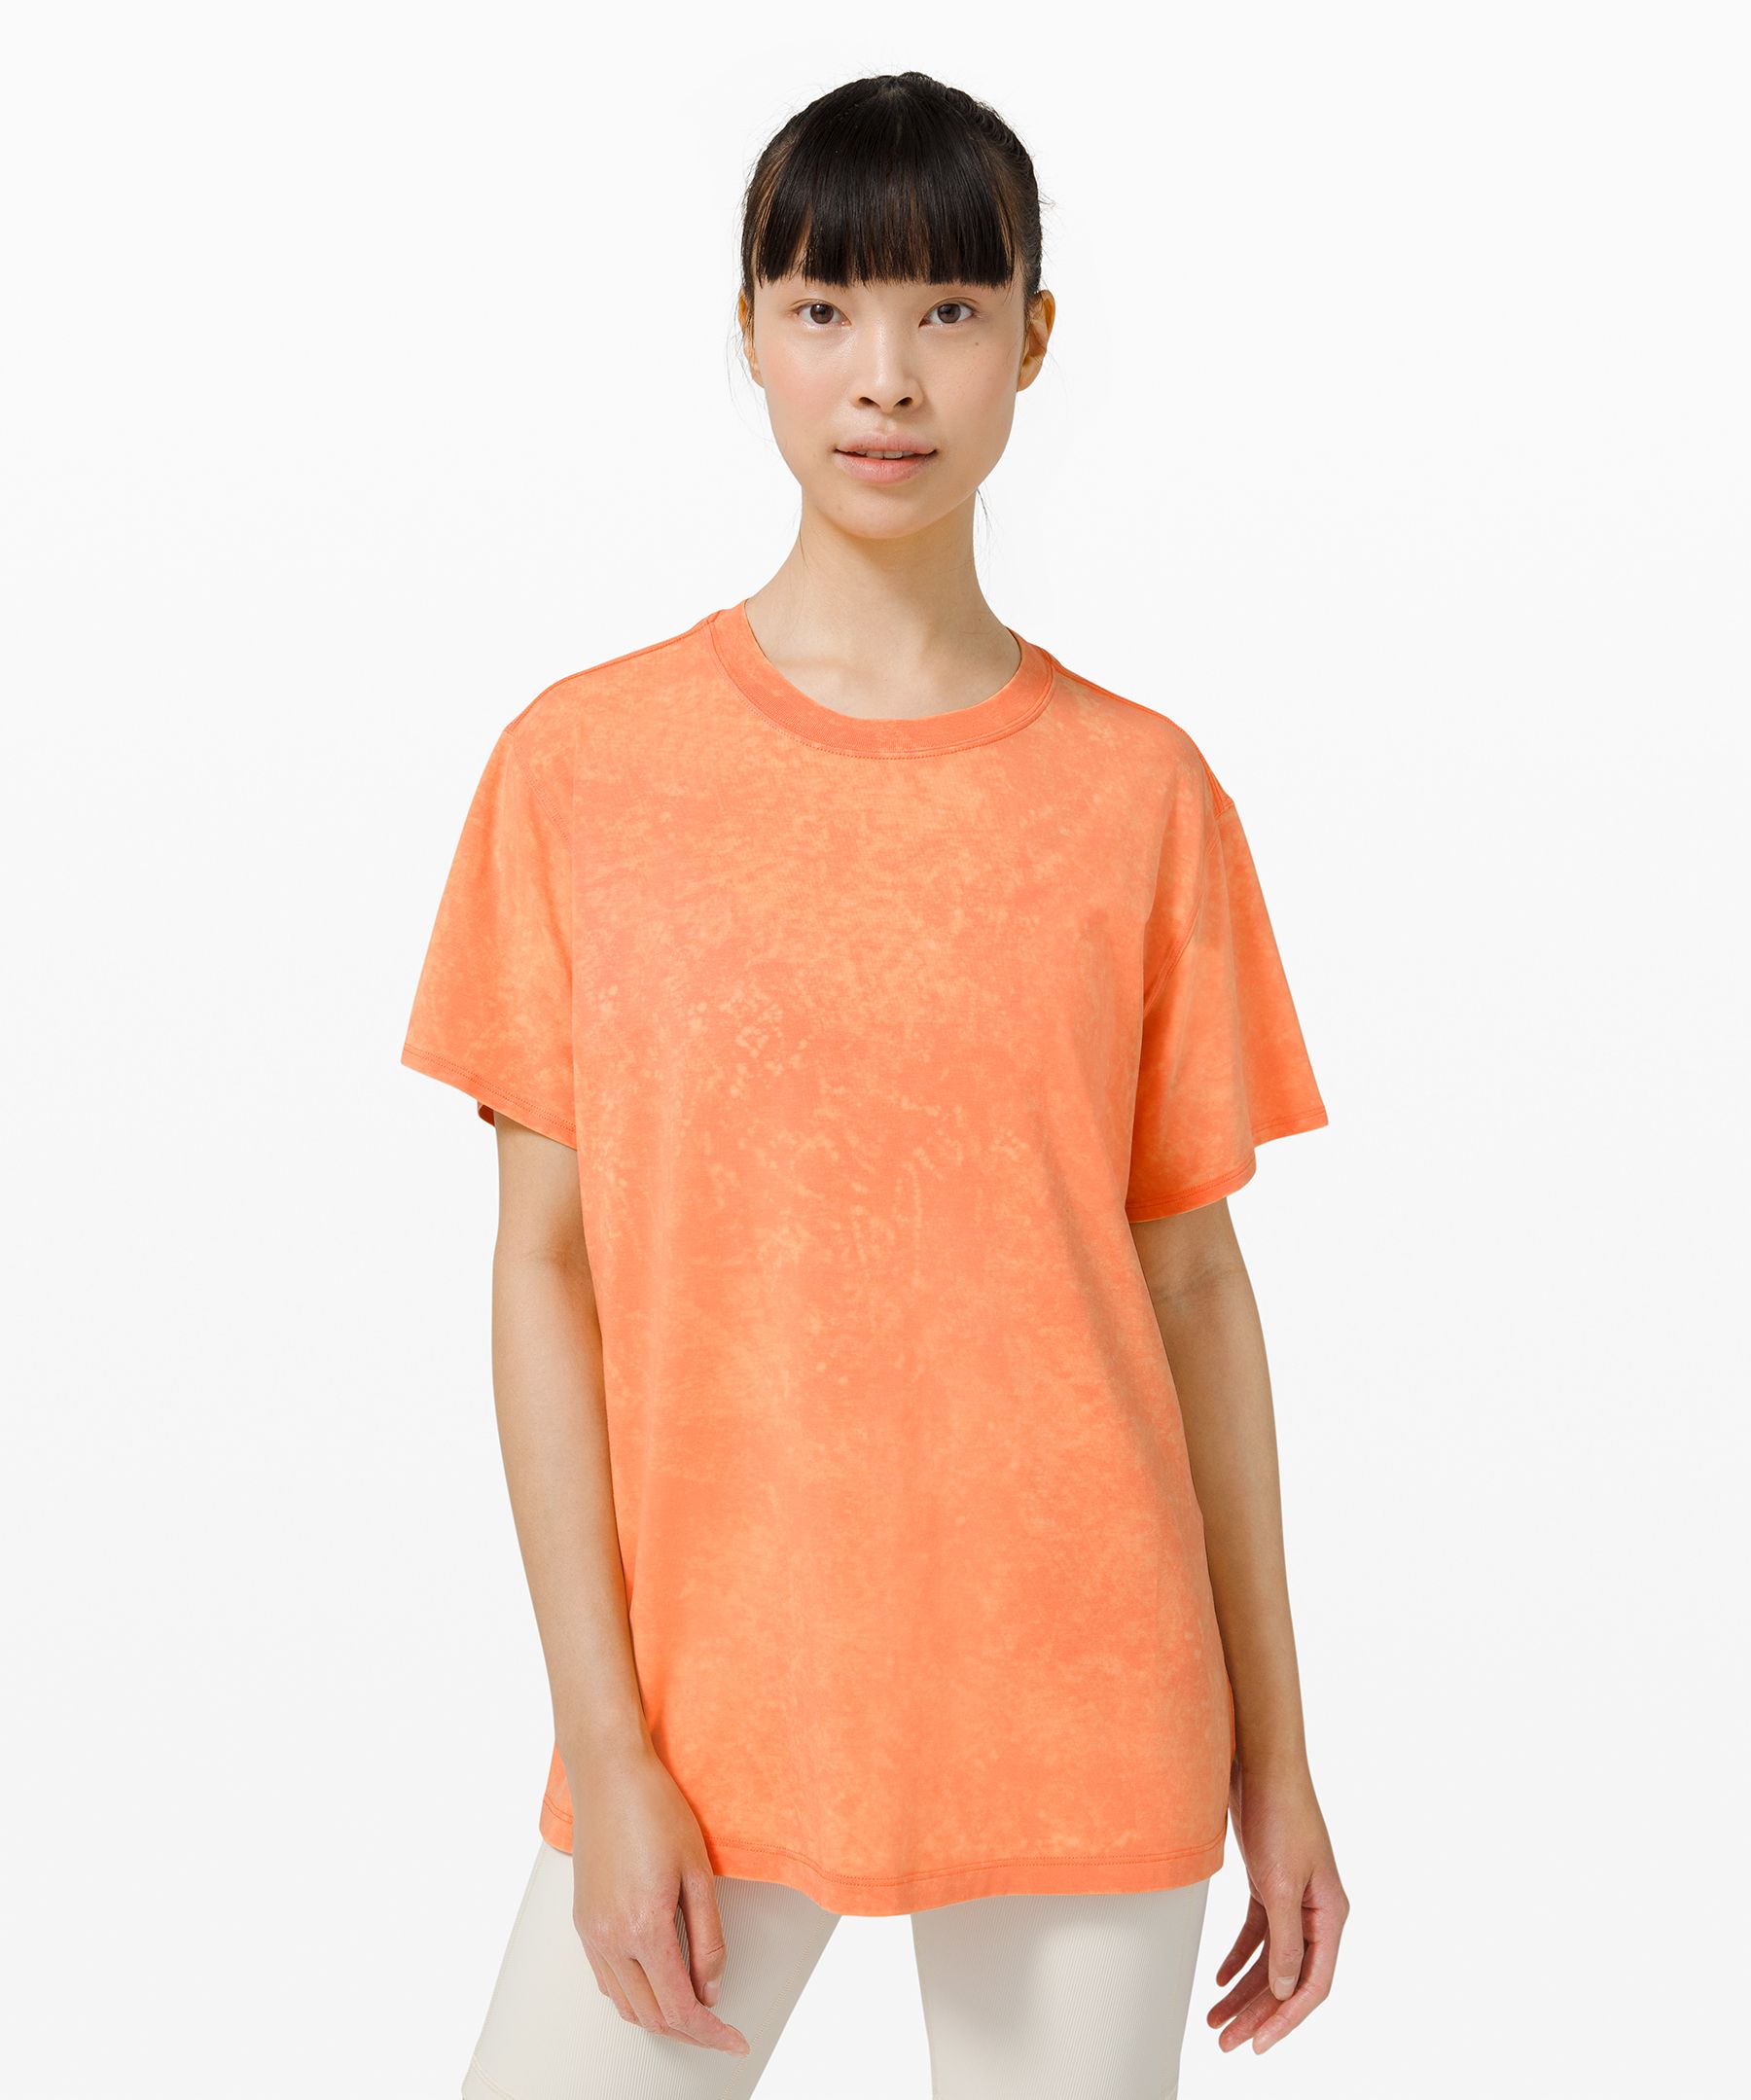 Lululemon All Yours Short Sleeve T-shirt In Cloudy Wash Golden Apricot